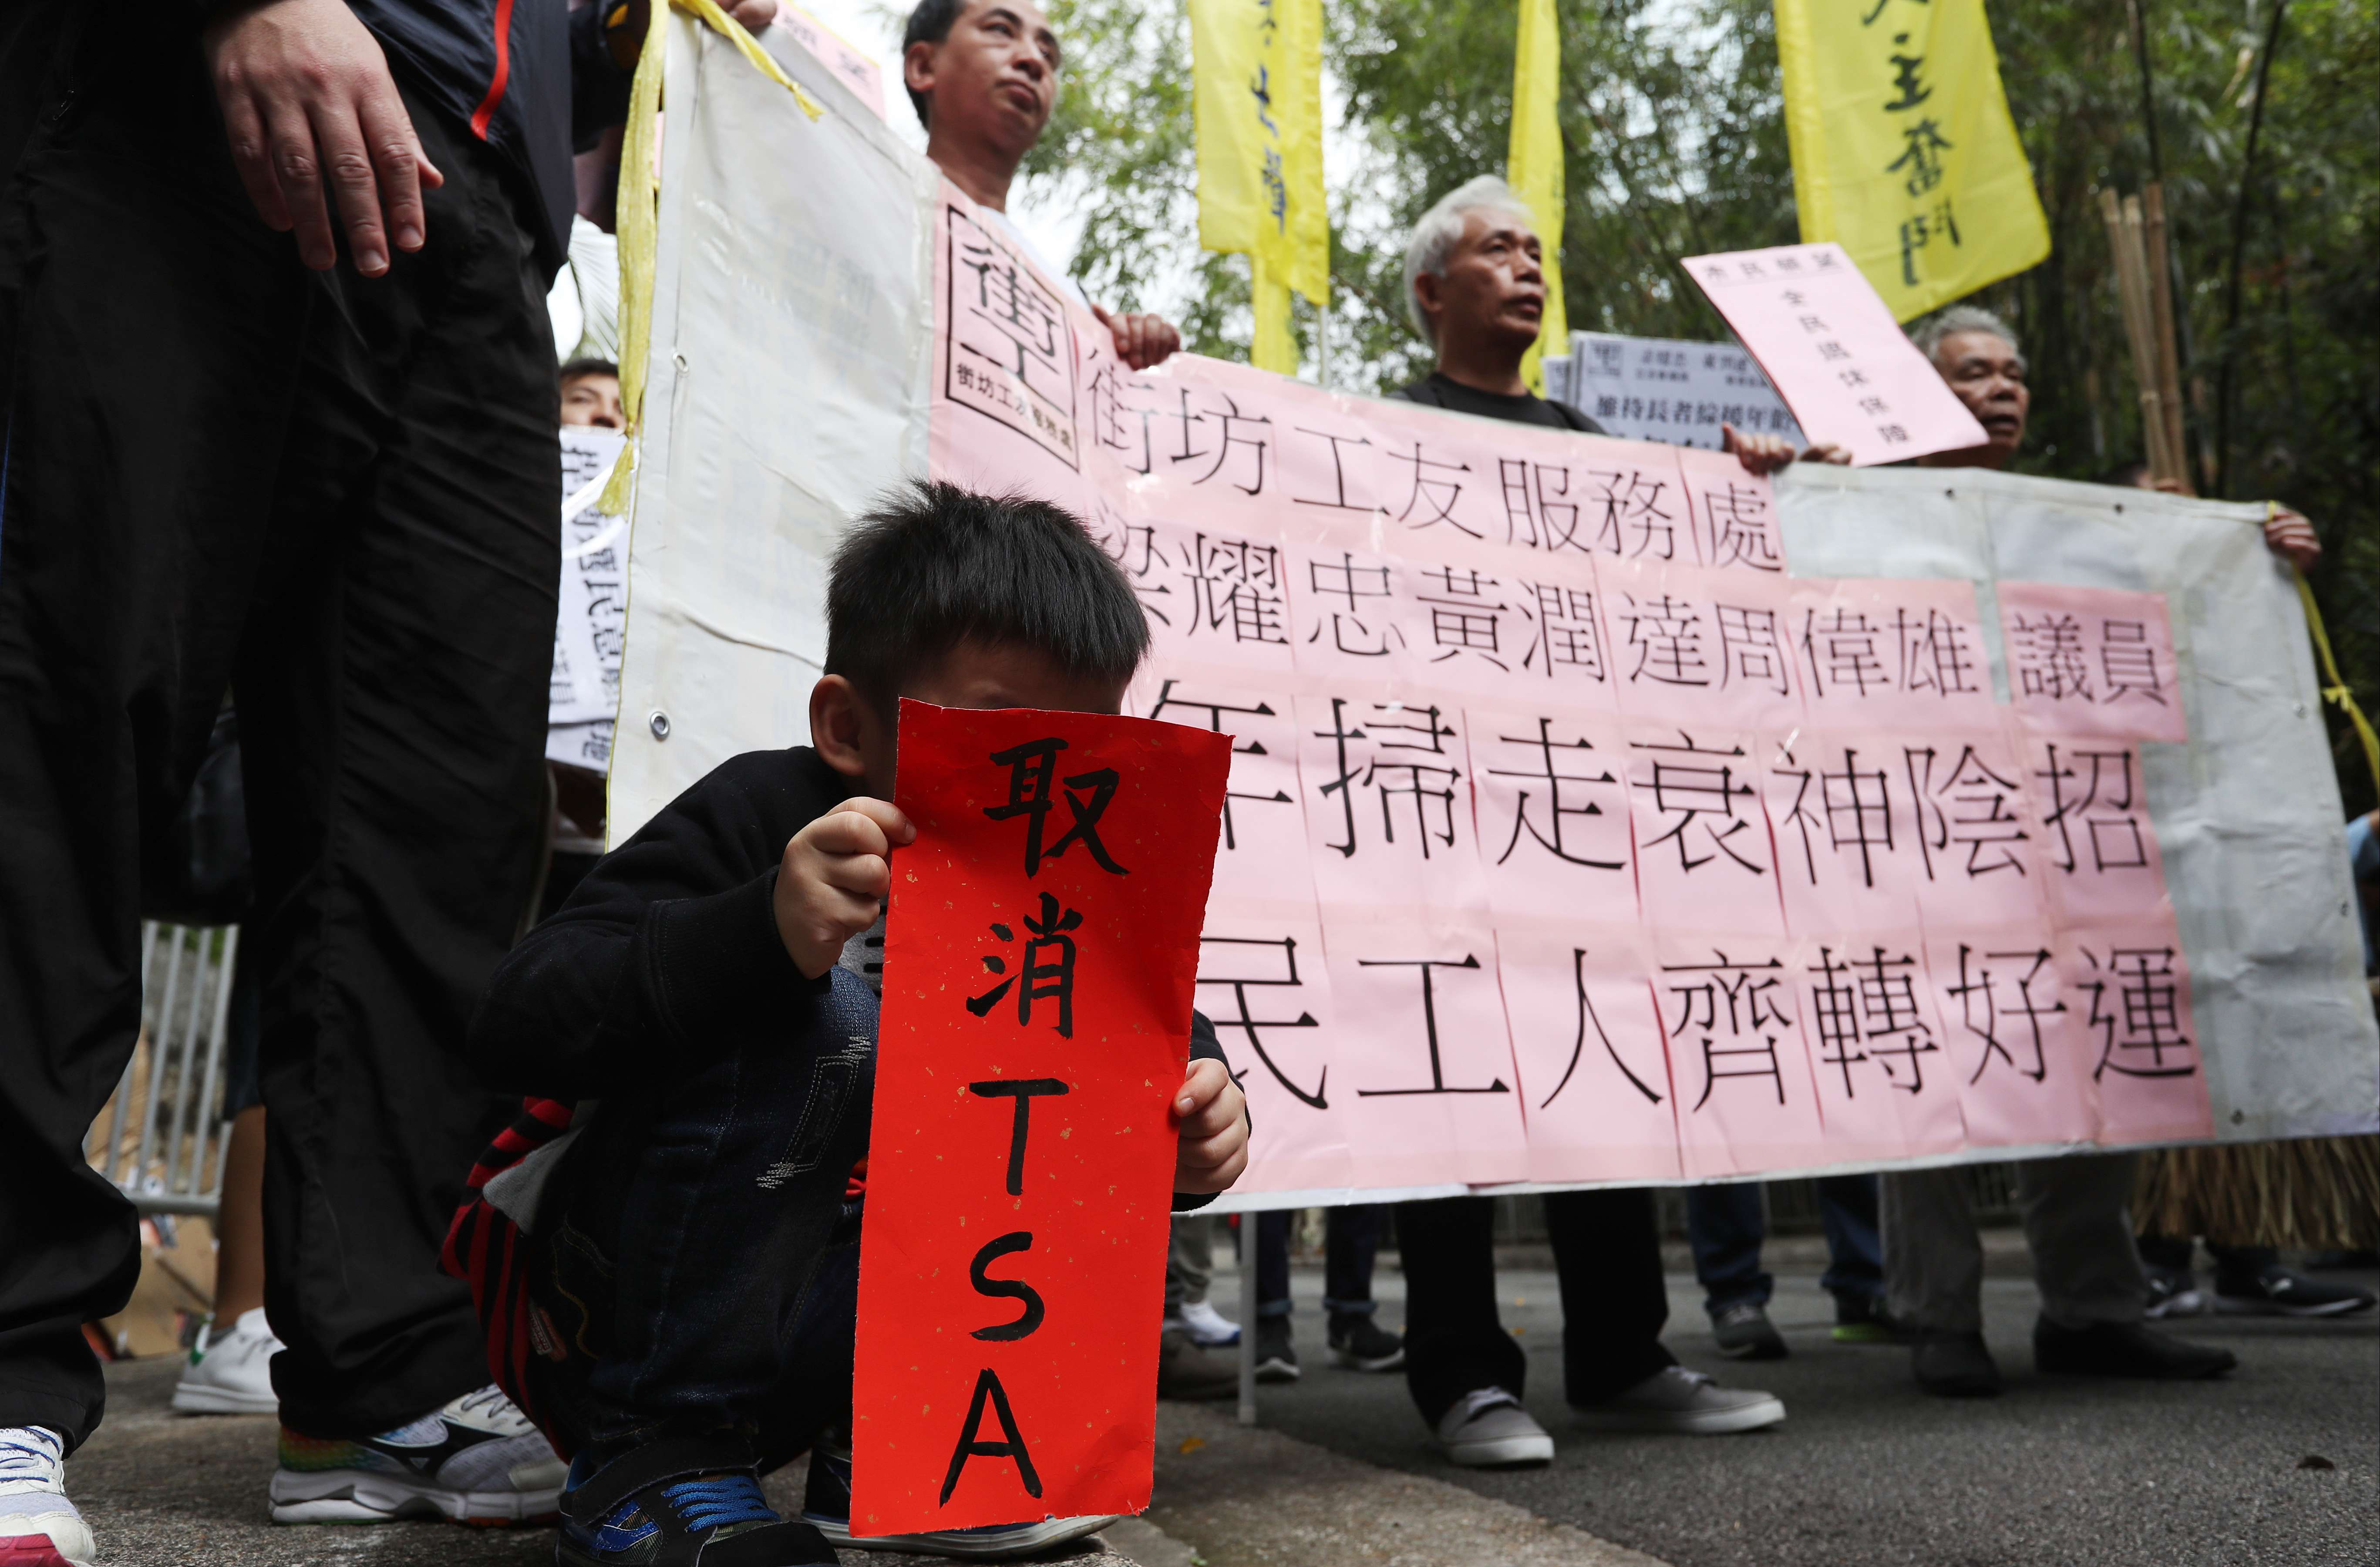 A young boy holds up a “fai chun” saying “cancel TSA”, at a protest against Chief Executive Leung Chun-ying’s performance, outside Government House on January 30. Photo: Nora Tam